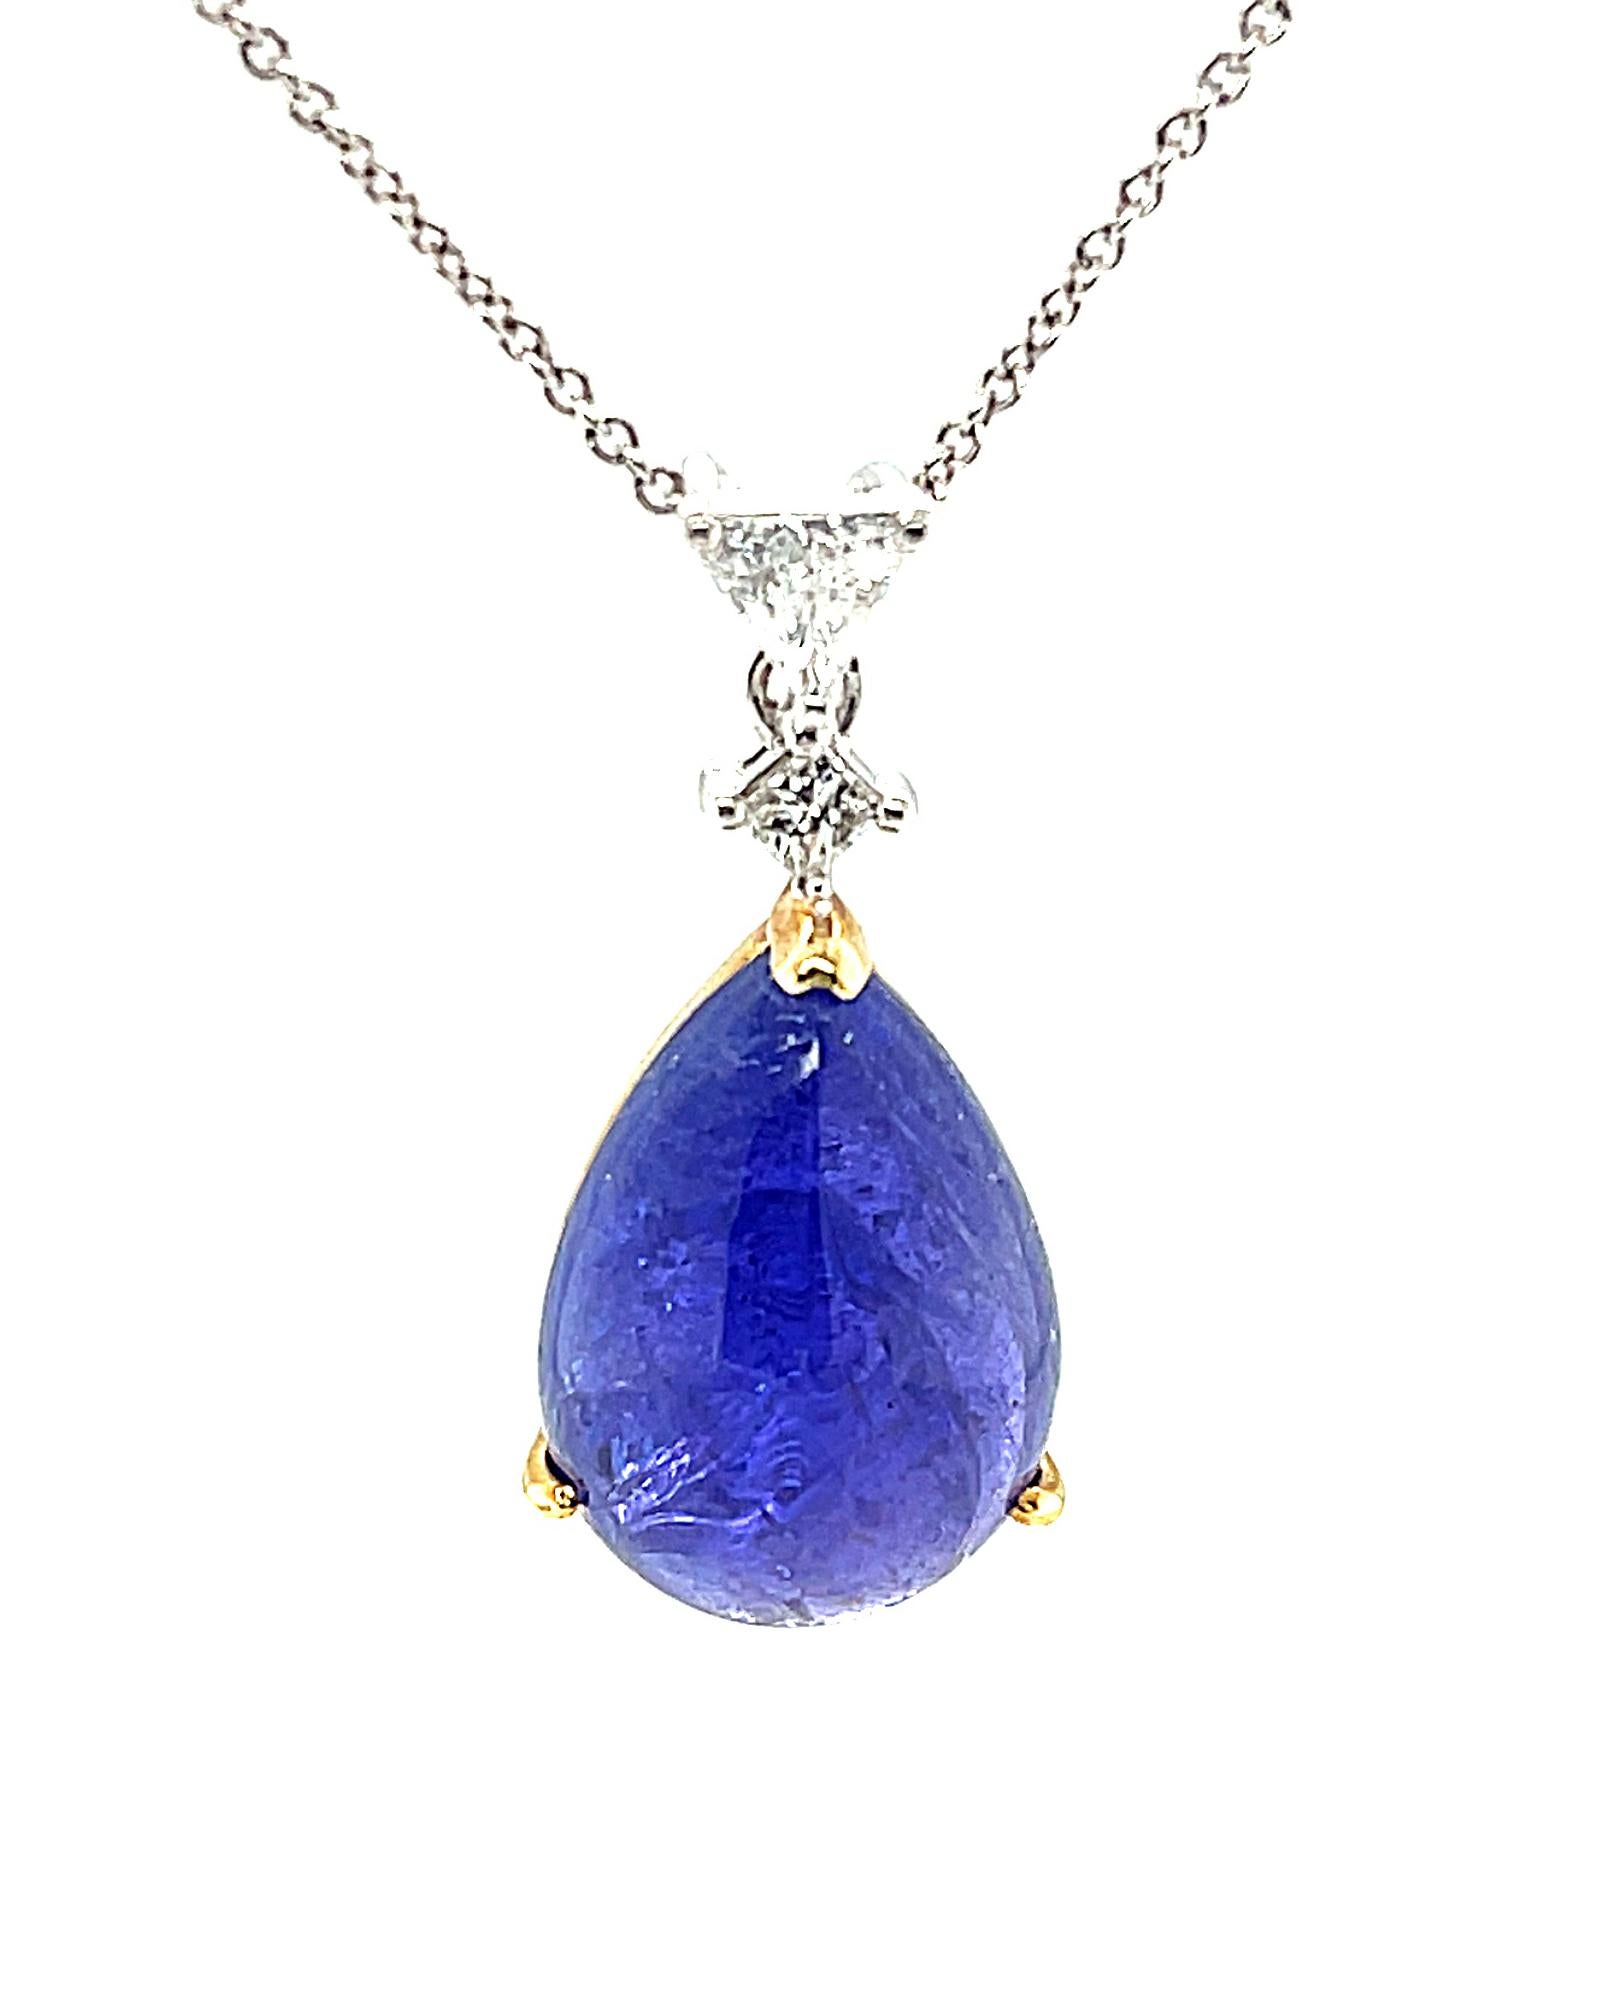 This pendant features a beautiful 12.56 carat tanzanite cabochon with the rich, lavendar-blue color that tanzanite is famous for! This gorgeous jewel hangs suspended from sparkling trillion and princess cut diamonds for a unique, yet timeless look.